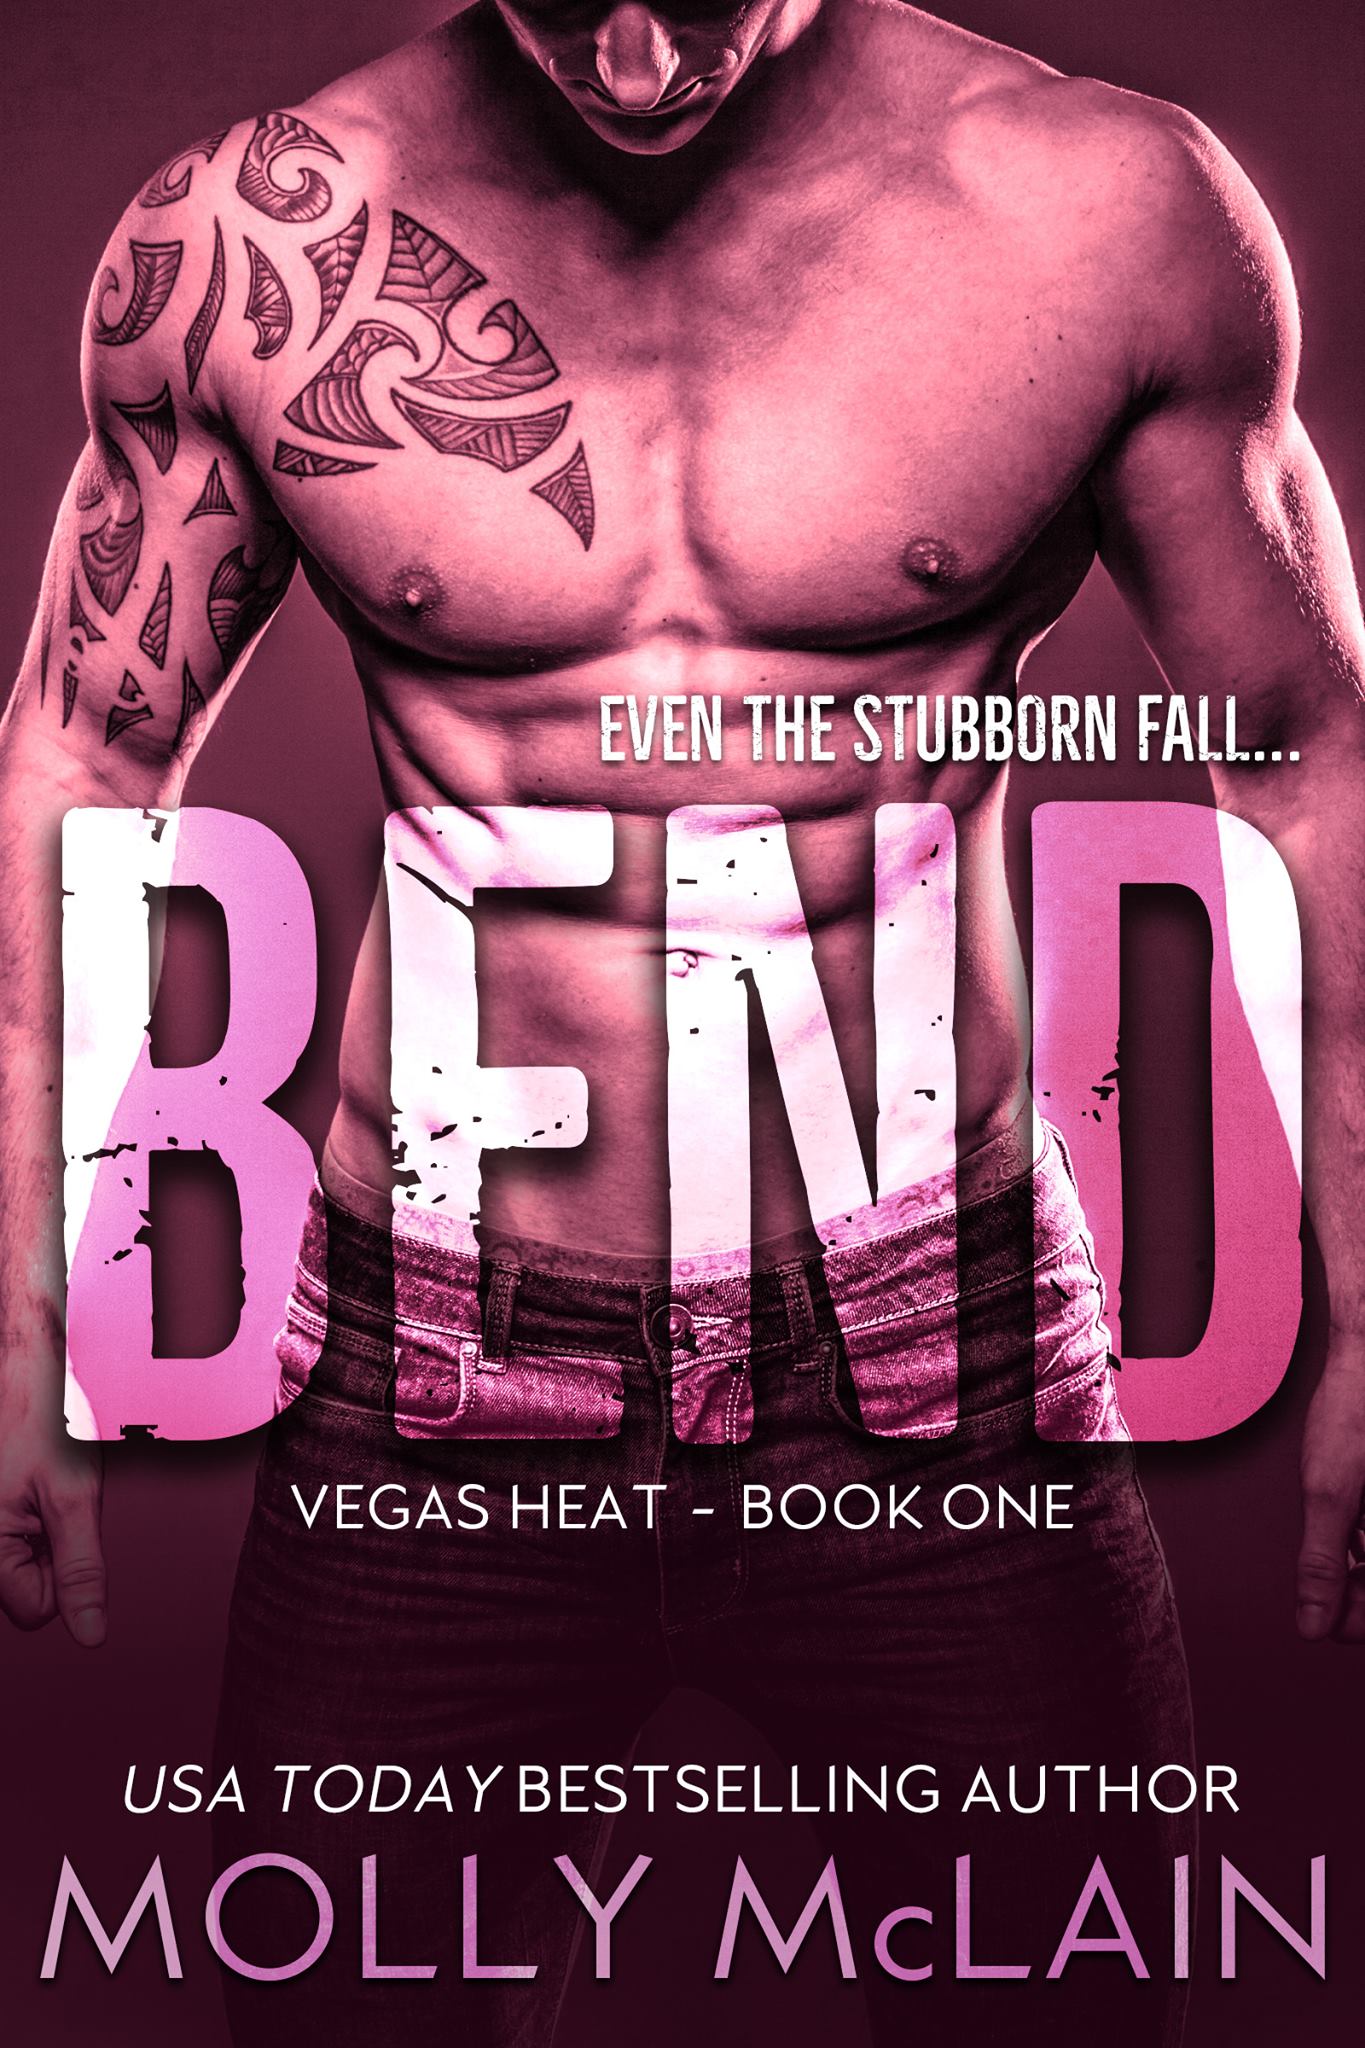 Bend by Molly McLain